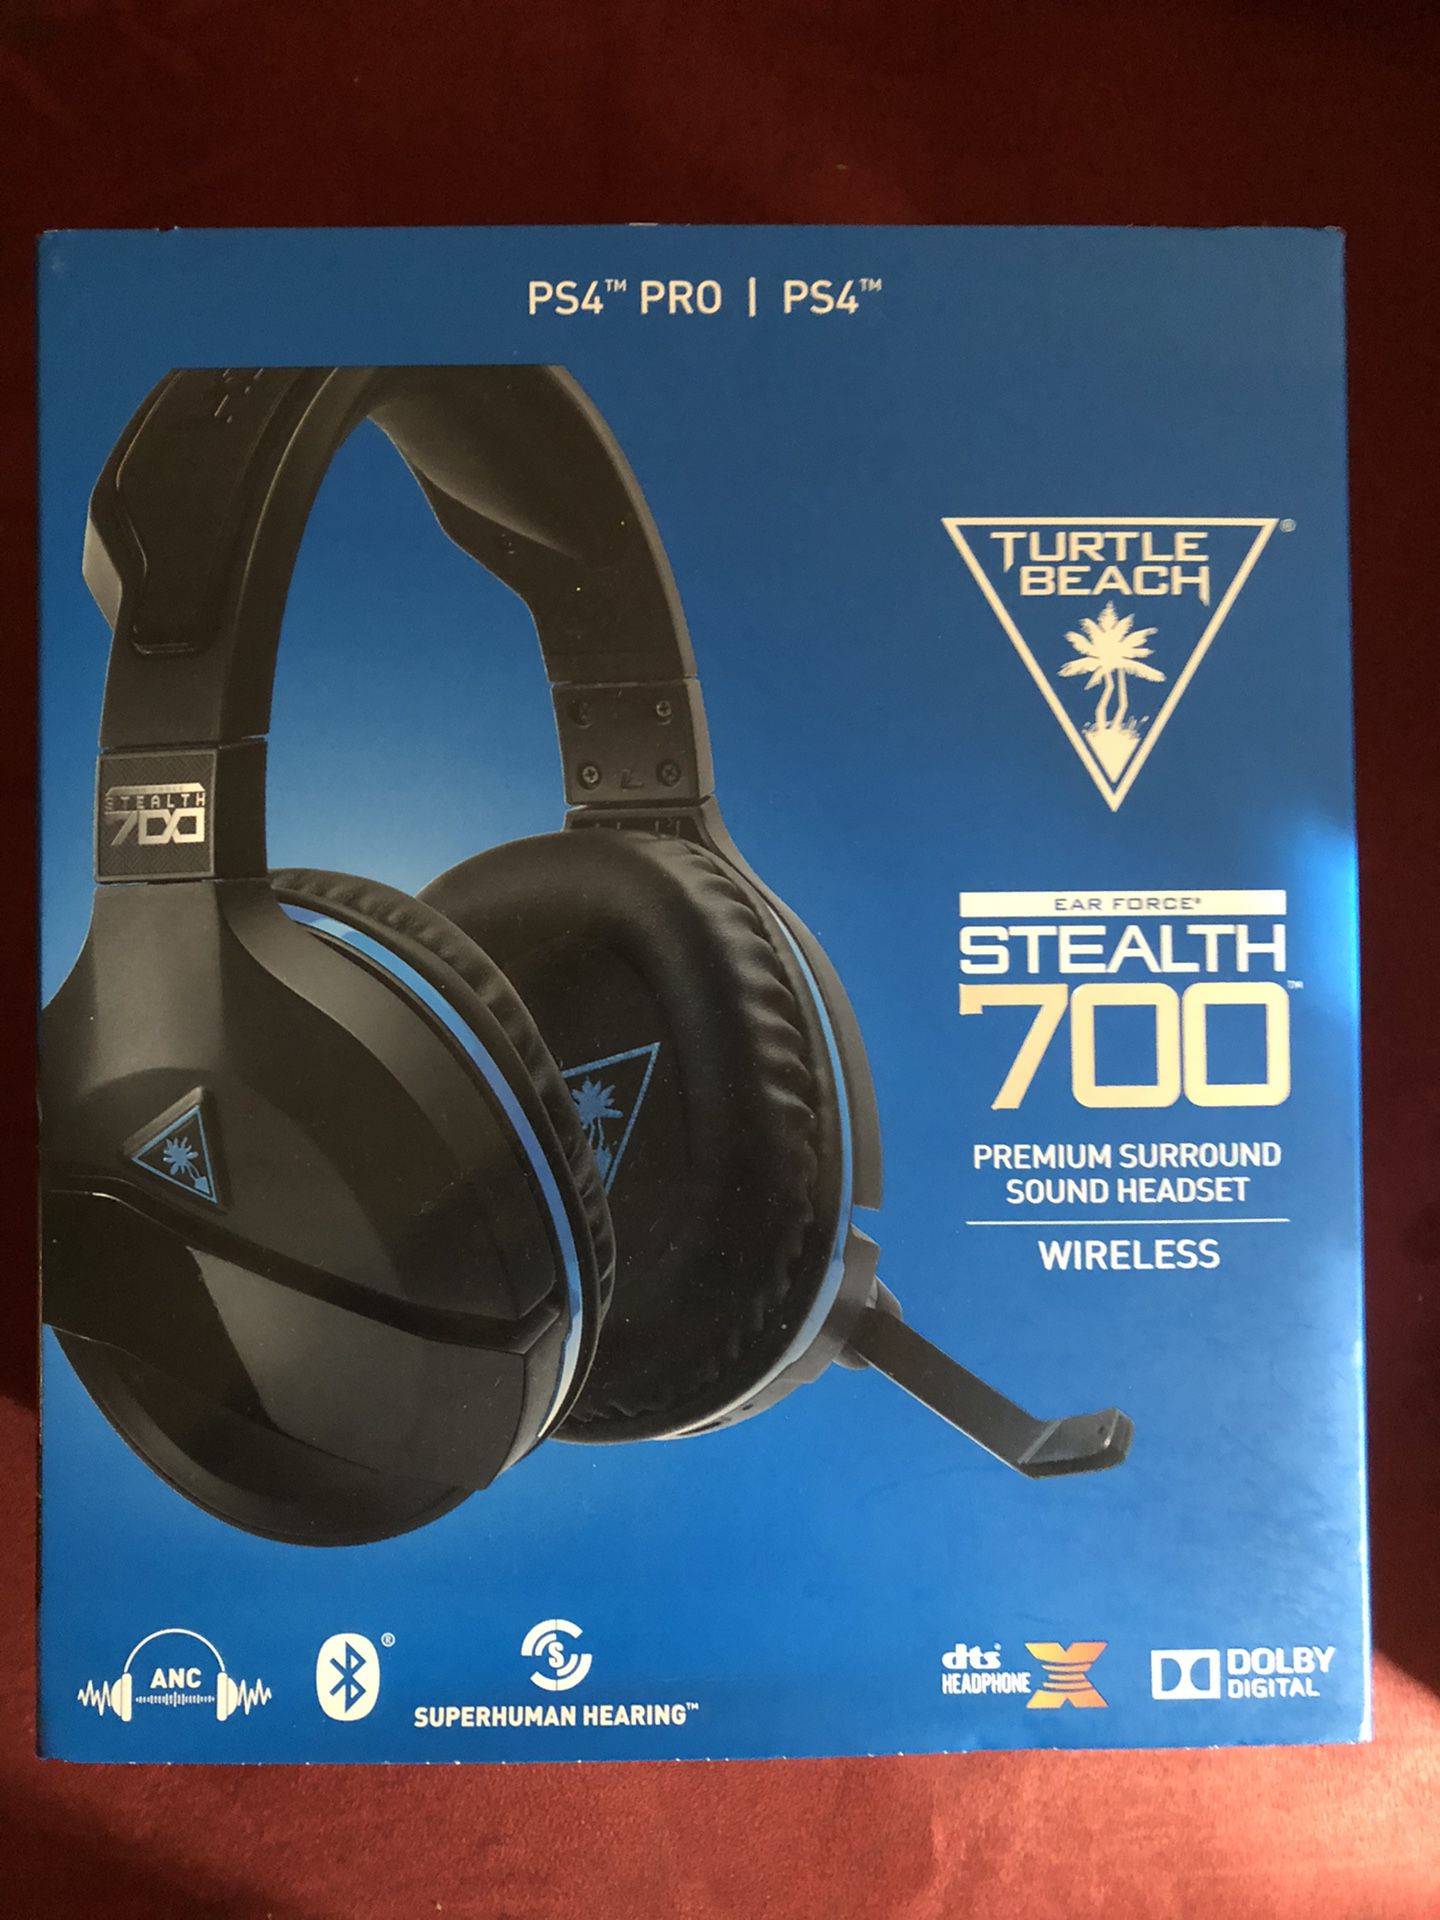 Turtle beach stealth 700 wireless gaming headset and call of duty black ops 3